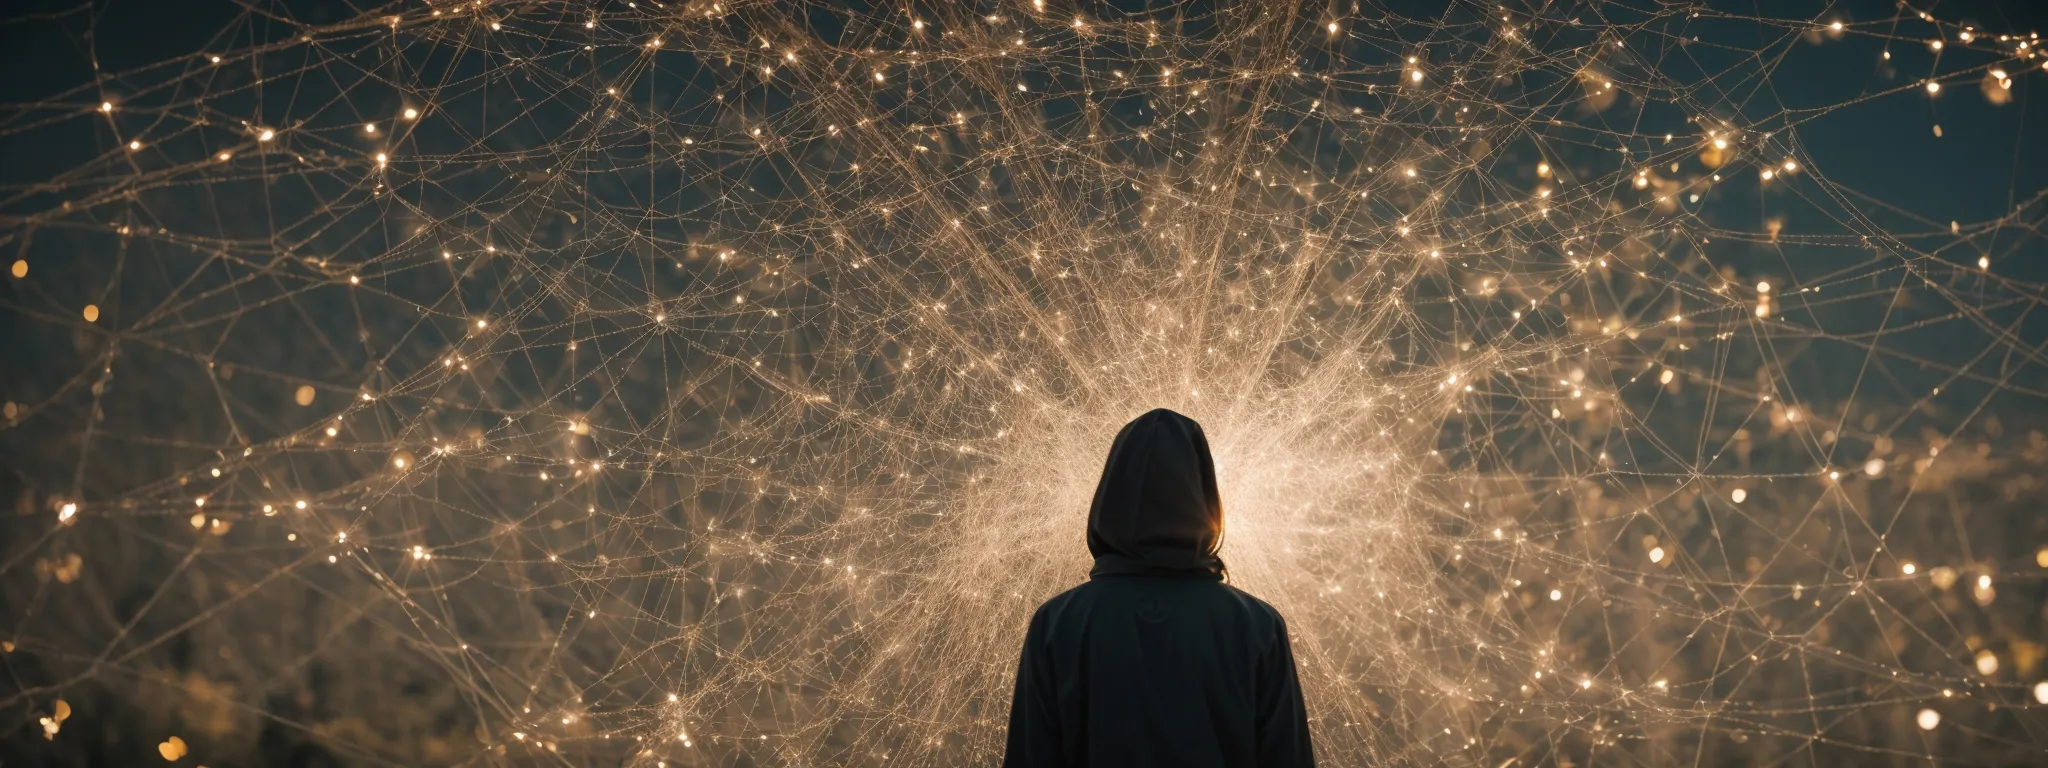 a person examines a complex web of interconnected nodes, symbolizing a website's structure optimized for search engines.